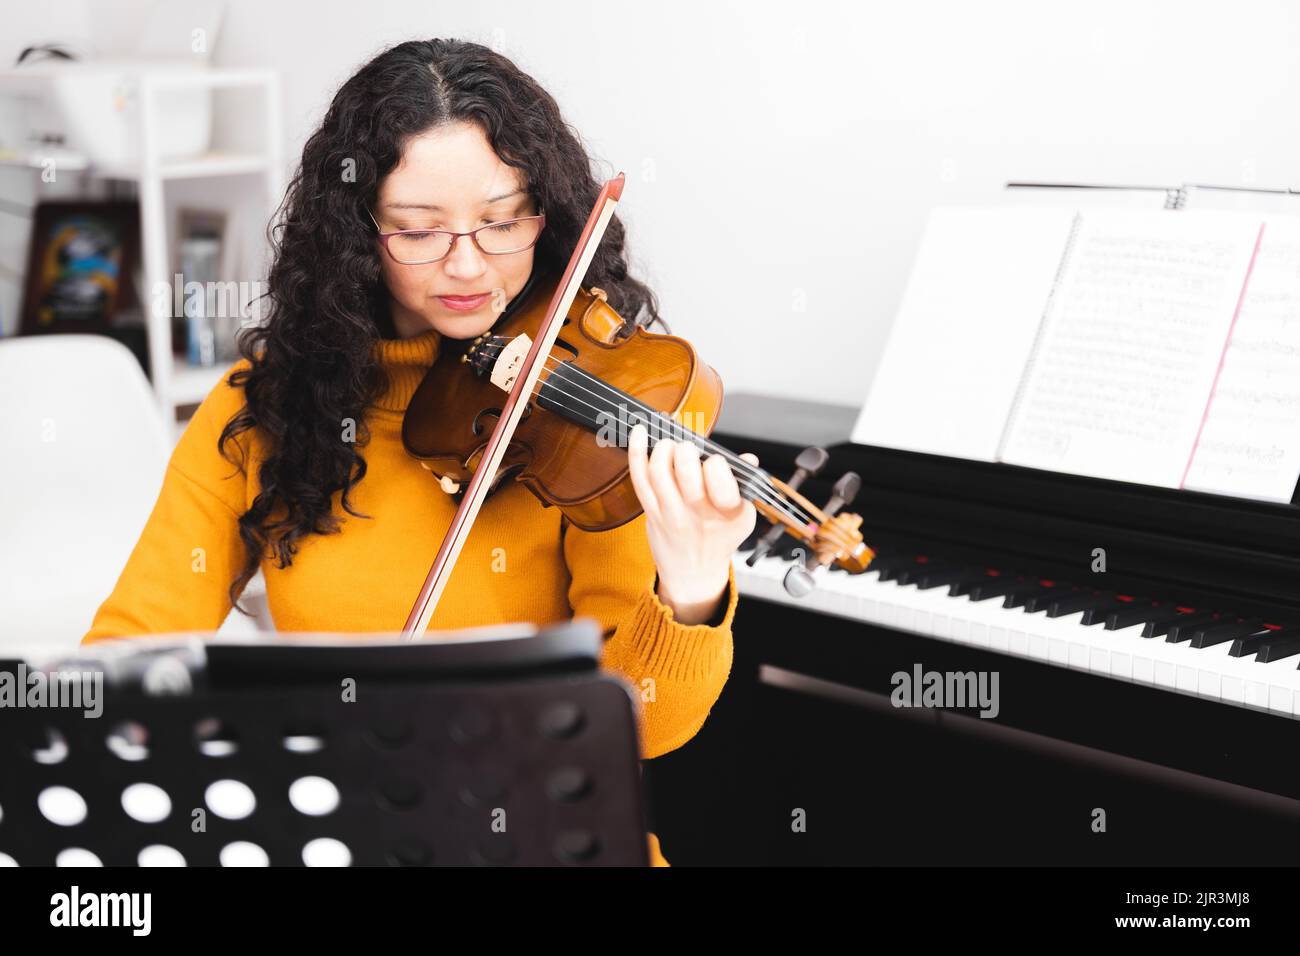 Eyes closed brunette concert woman wearing a yellow sweater, and playing violin by reading sheet music. Stock Photo